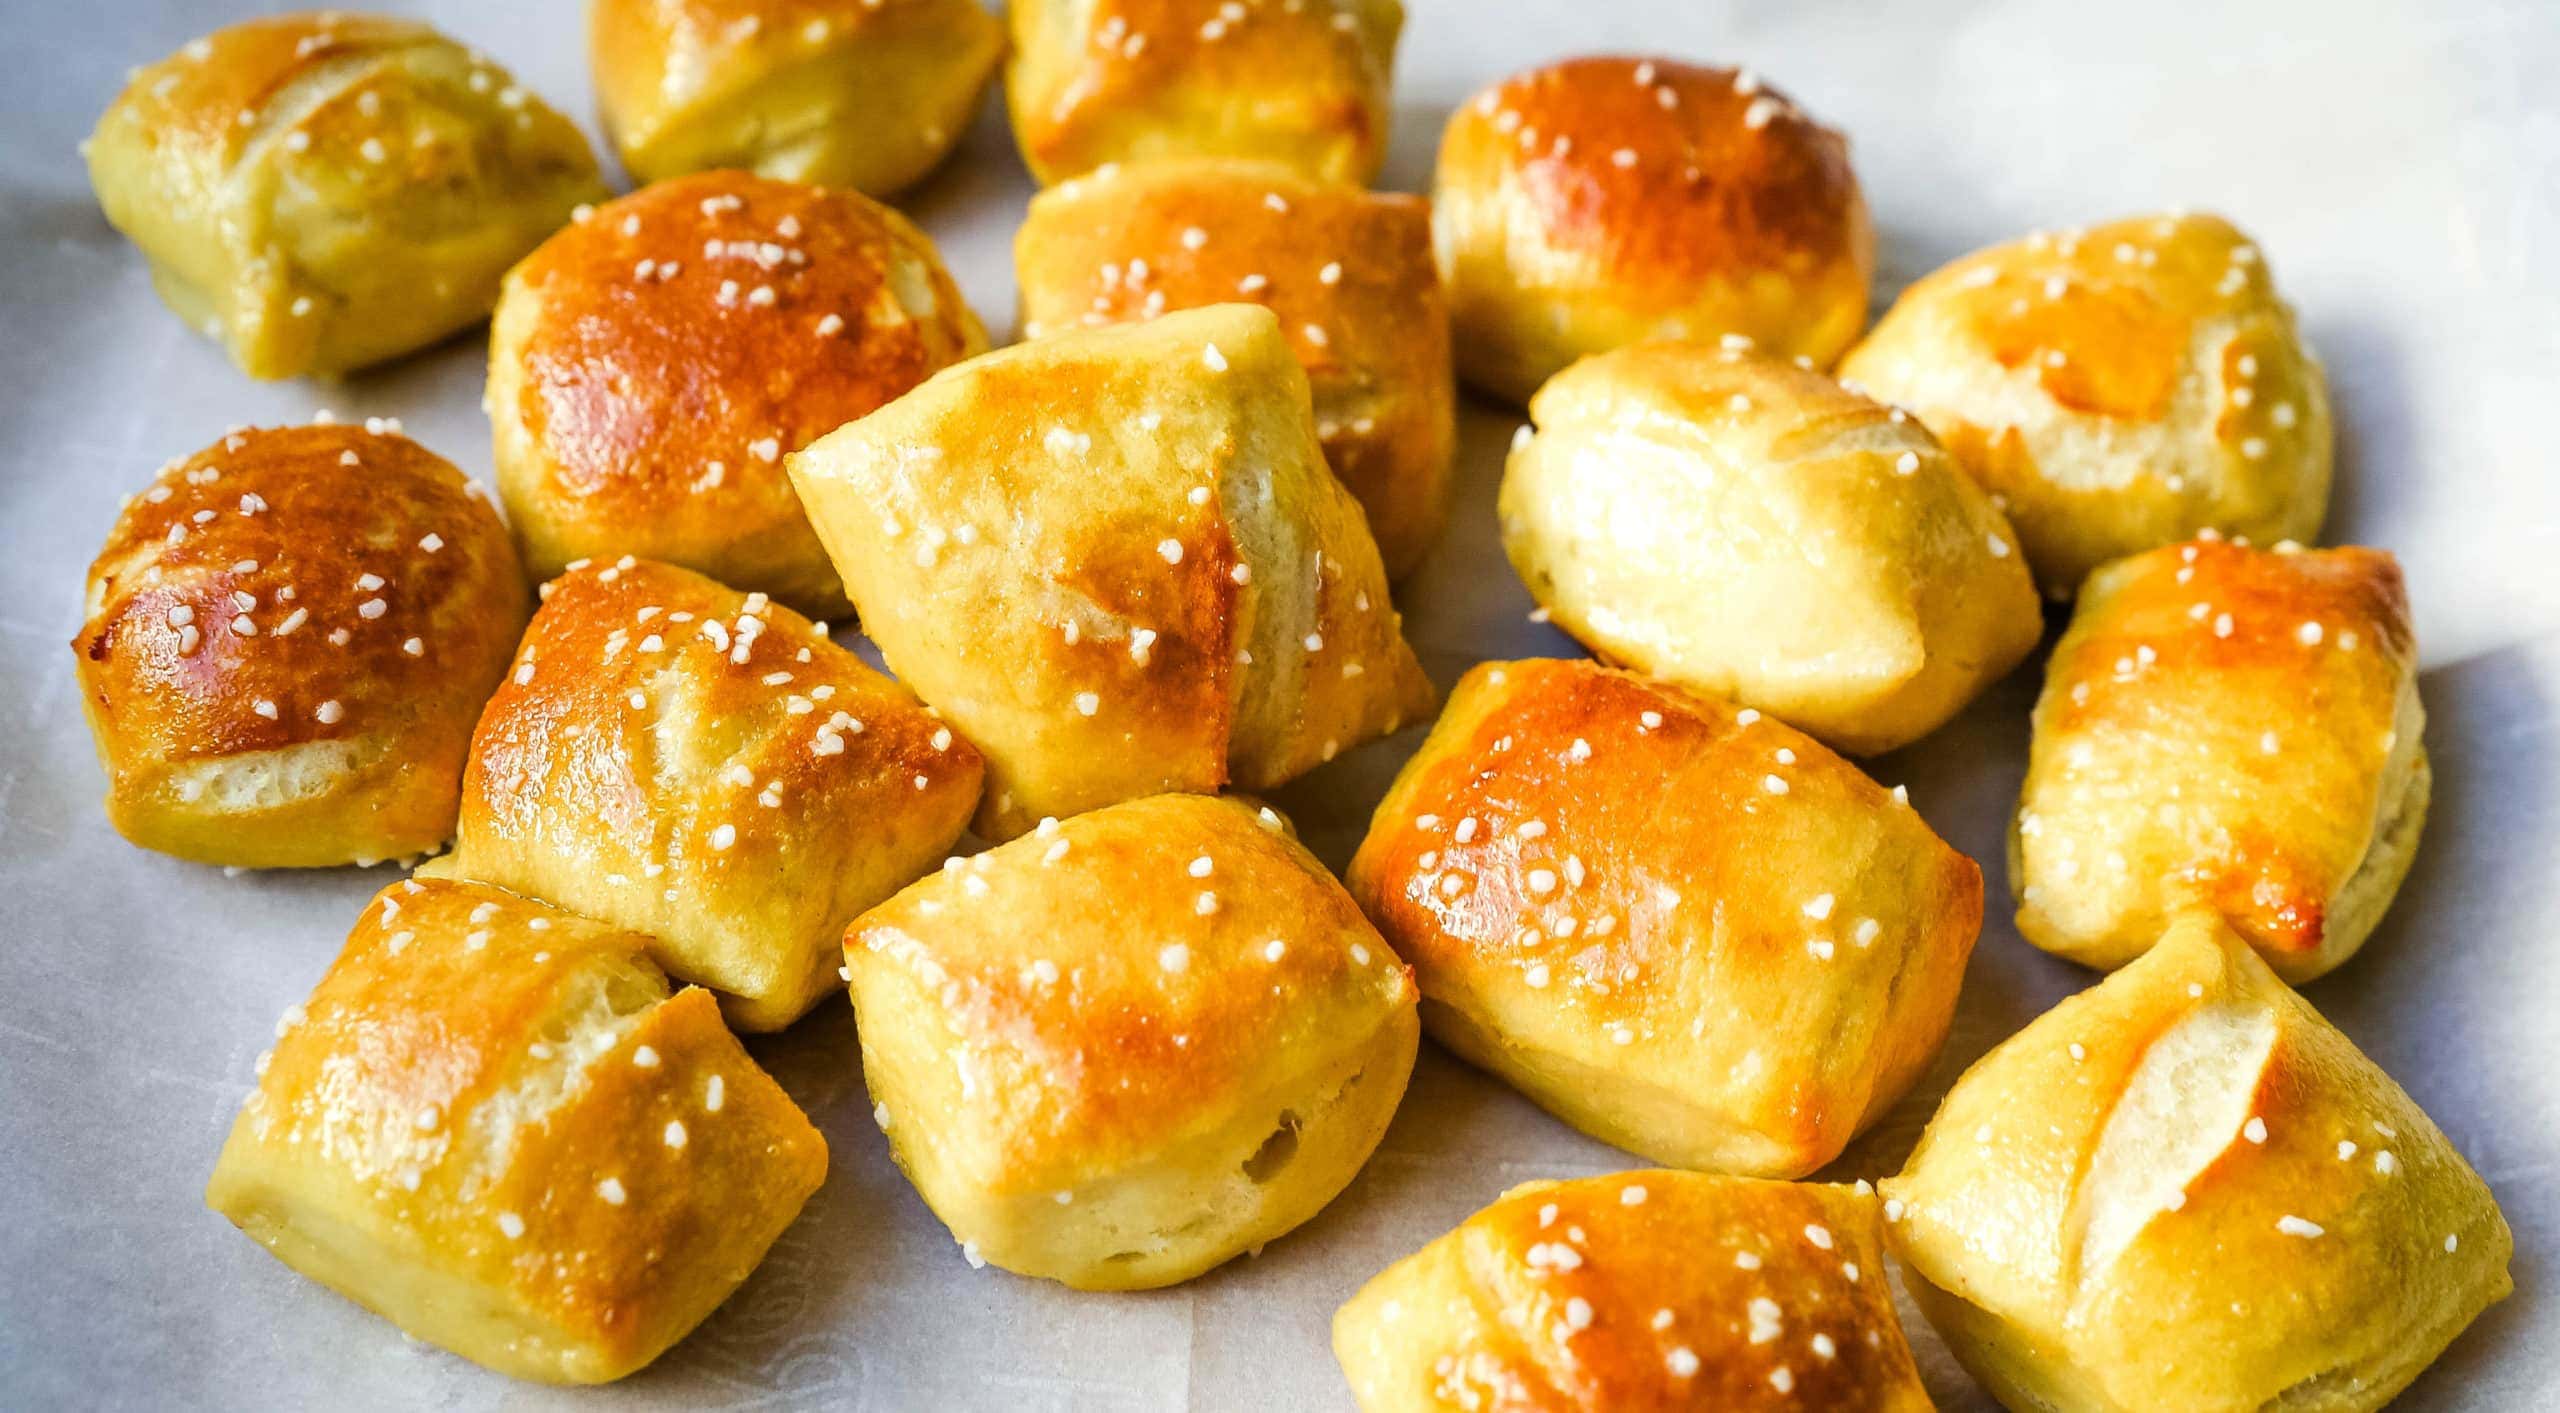 Homemade Soft Pretzel Bites Soft buttery homemade pretzel bites just like you find in the pretzel stores in the mall but even better! It is so easy to make pretzel bites at home. www.modernhoney.com #pretzels #pretzel #homemadepretzels #pretzelbites